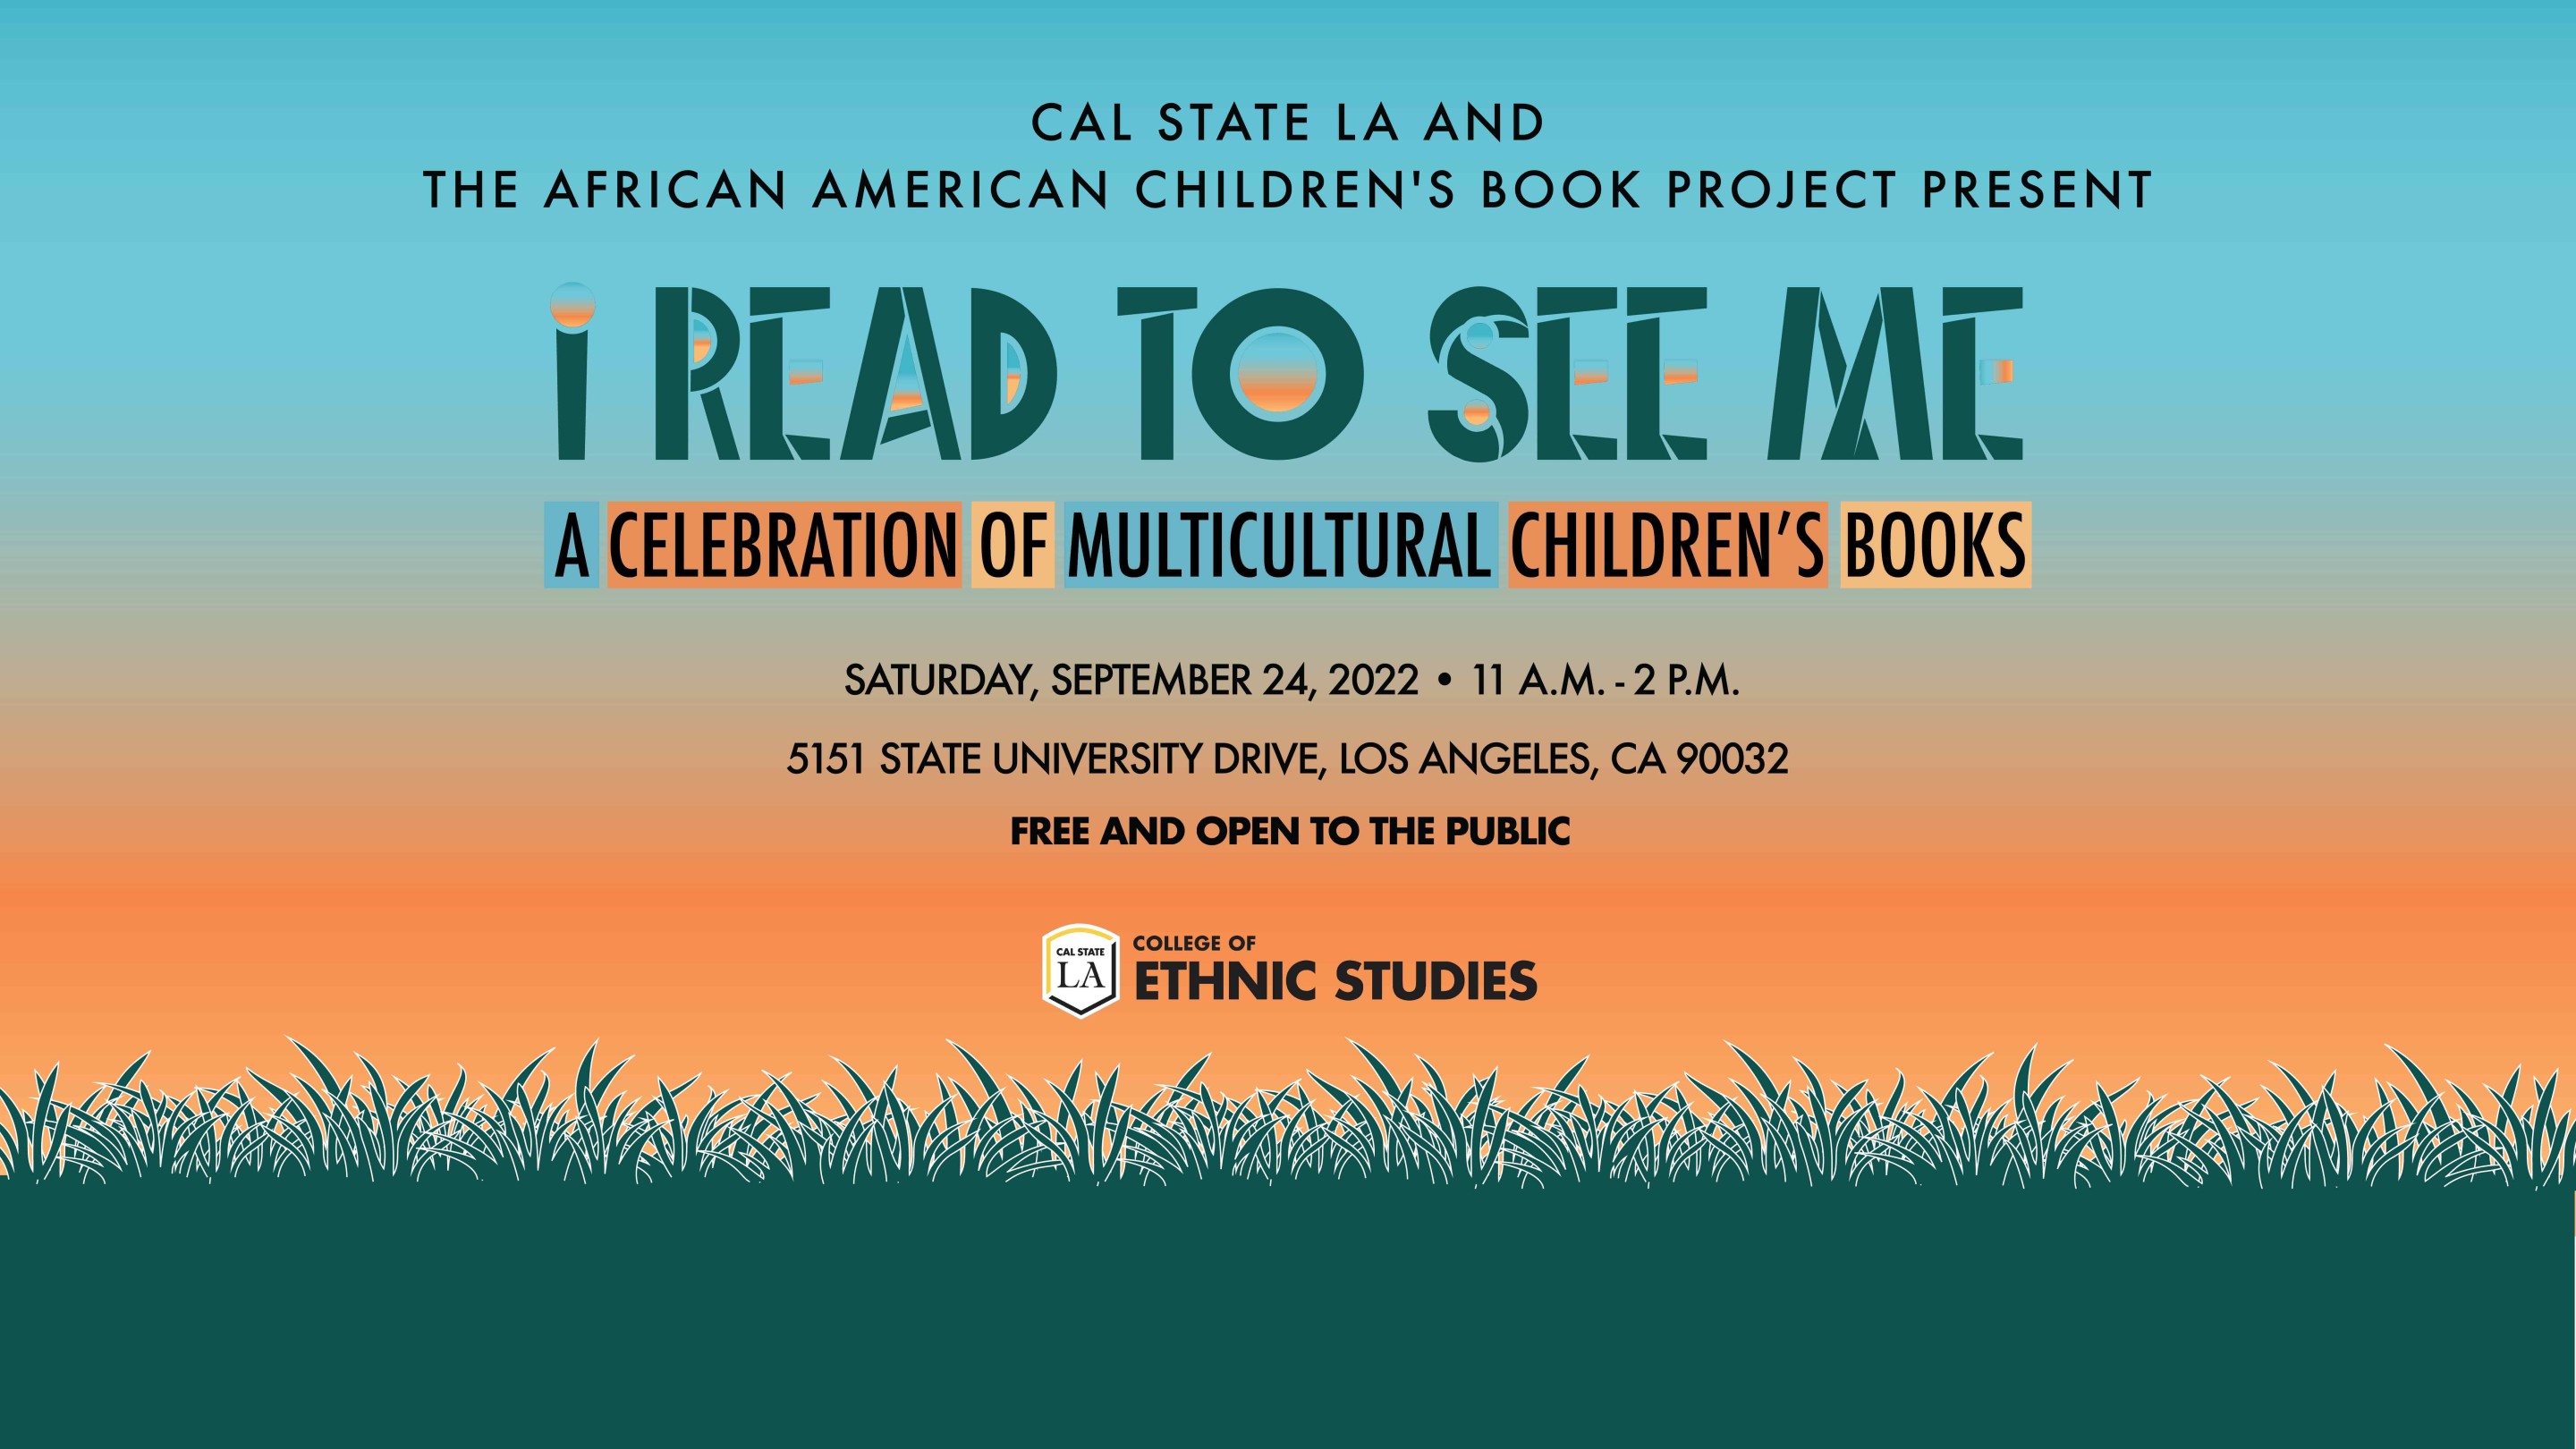 An illustration with decorative type that says Cal State LA and The African American Children's Book Project present I read to see me, a celebration of multicultural children's books.